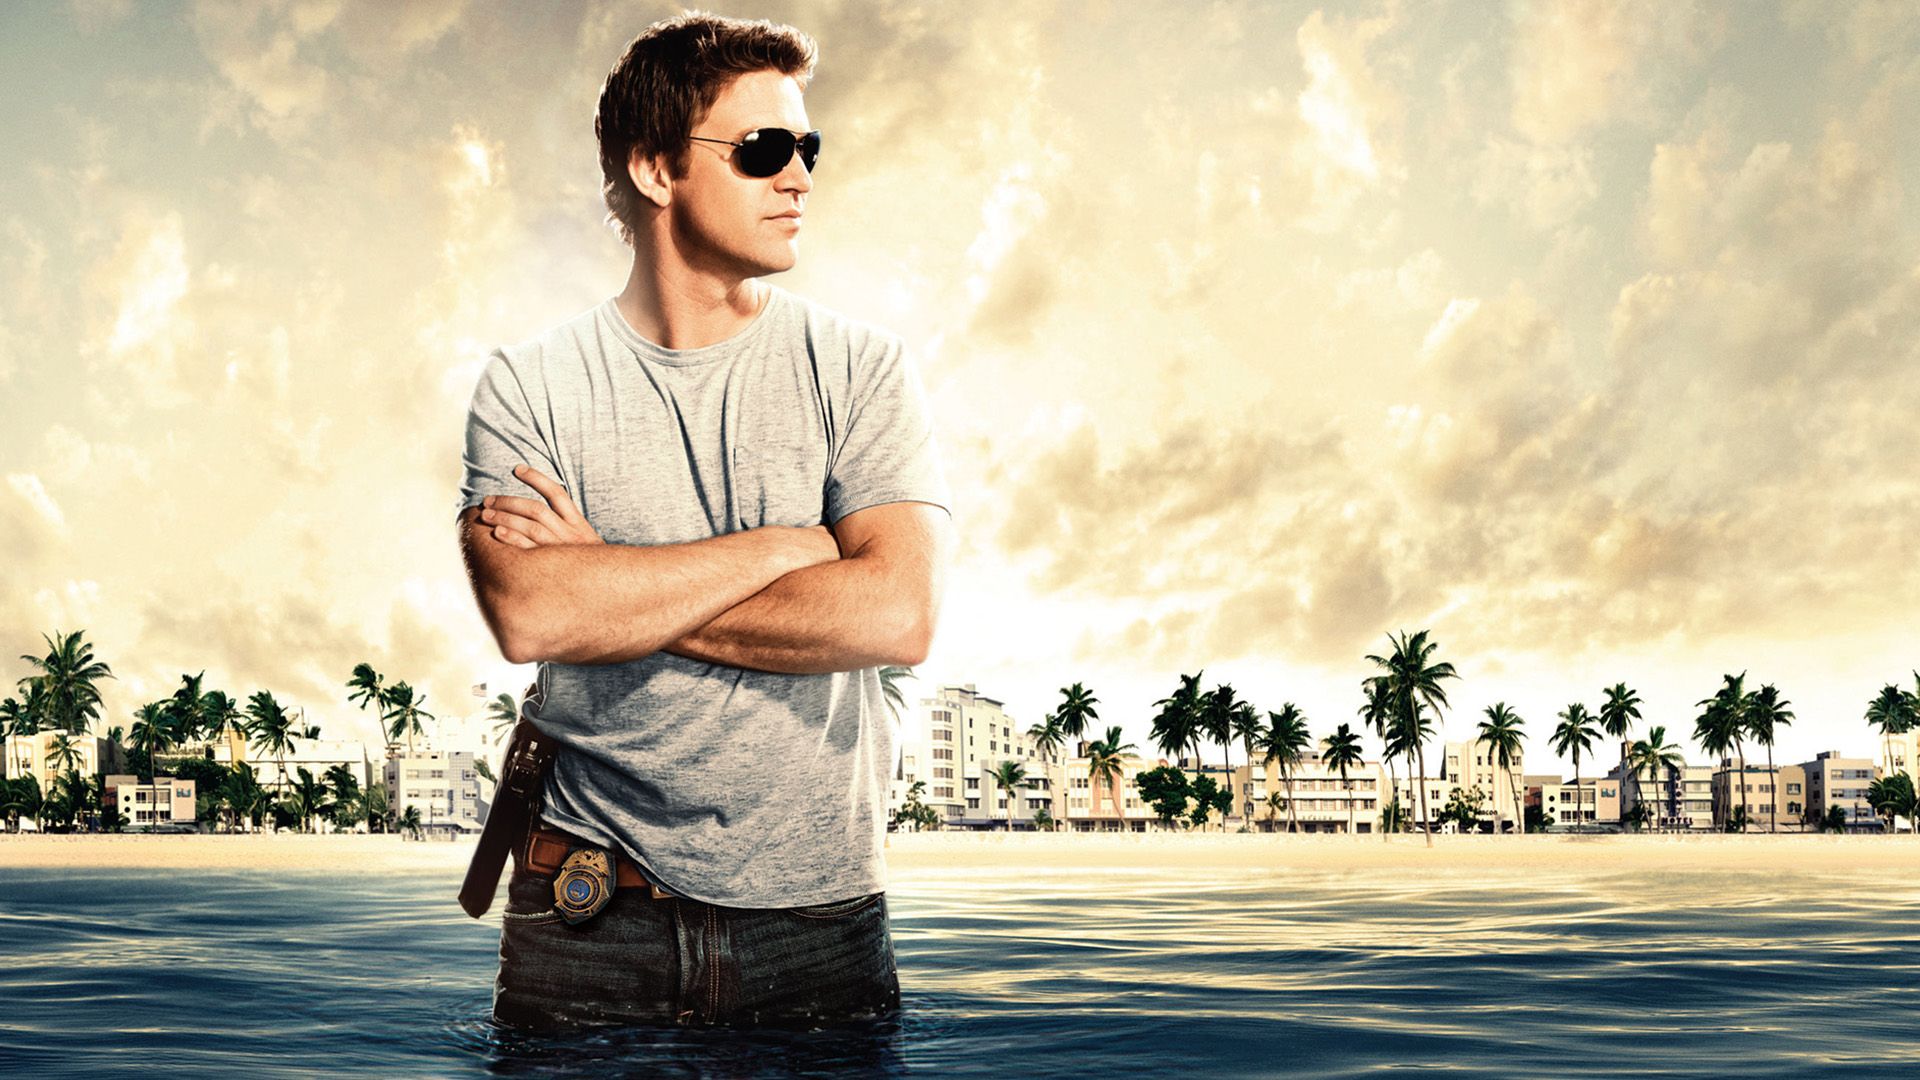 The Glades background